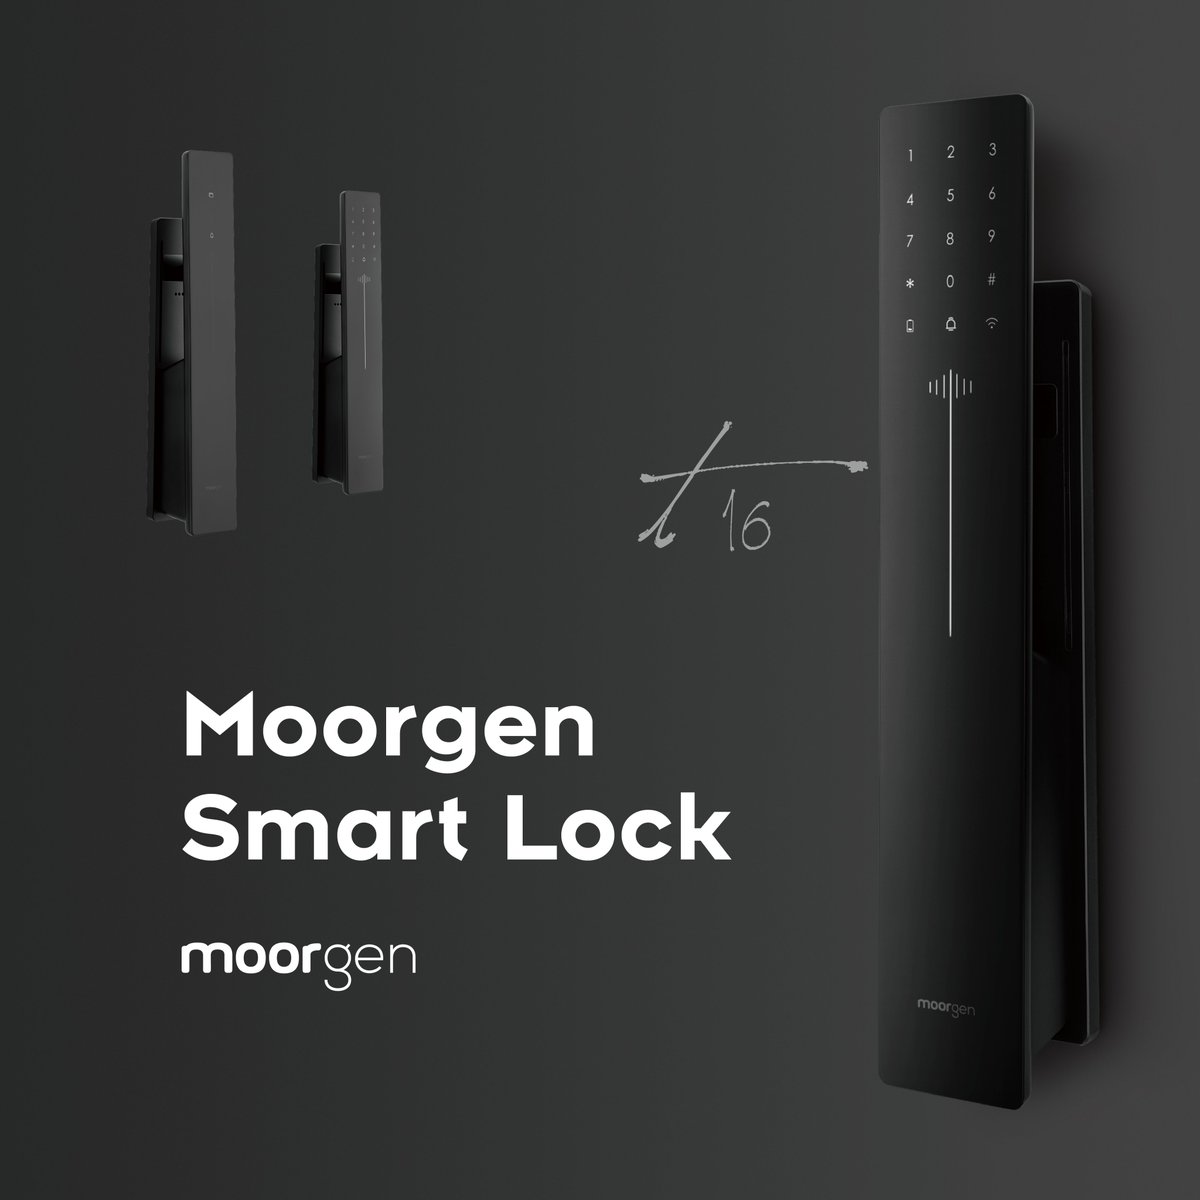 🎉Join Moorgen at the Canton Fair 2024 and get ready to witness the future of smart security

📅 Date: April 15 - 19
📍 Booth: 9.1F41-42
🏢 Add: Pazhou Exhibition Center, Guangzhou

#MoorgenSmartLock #cantonfair #cantonfain2014 #digitallock #smartlock #smarthome #homesecurity